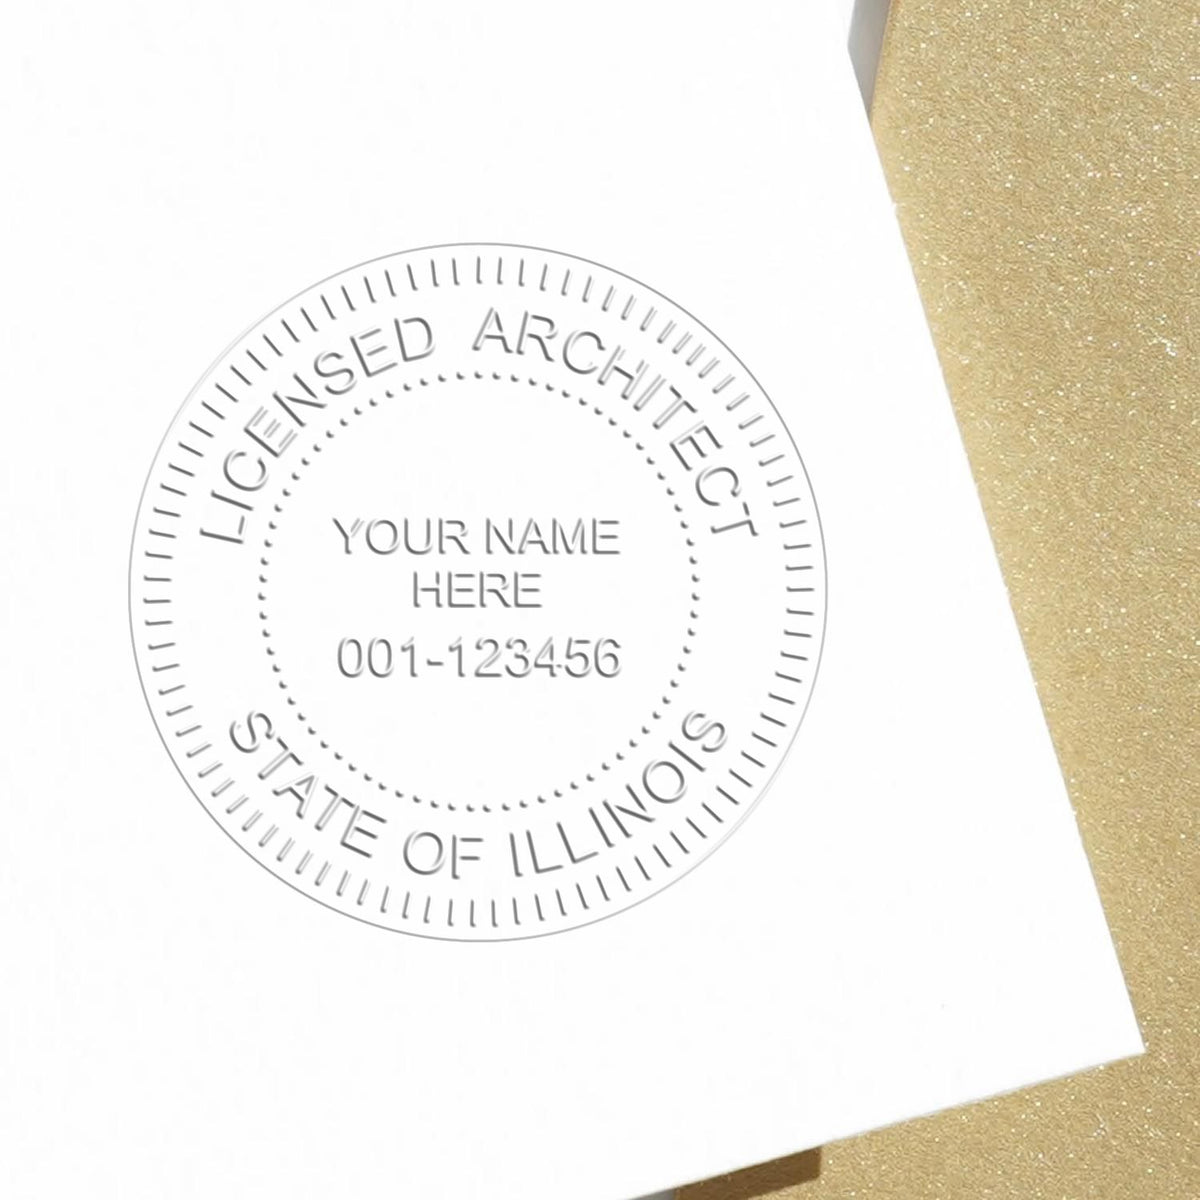 A photograph of the Hybrid Illinois Architect Seal stamp impression reveals a vivid, professional image of the on paper.